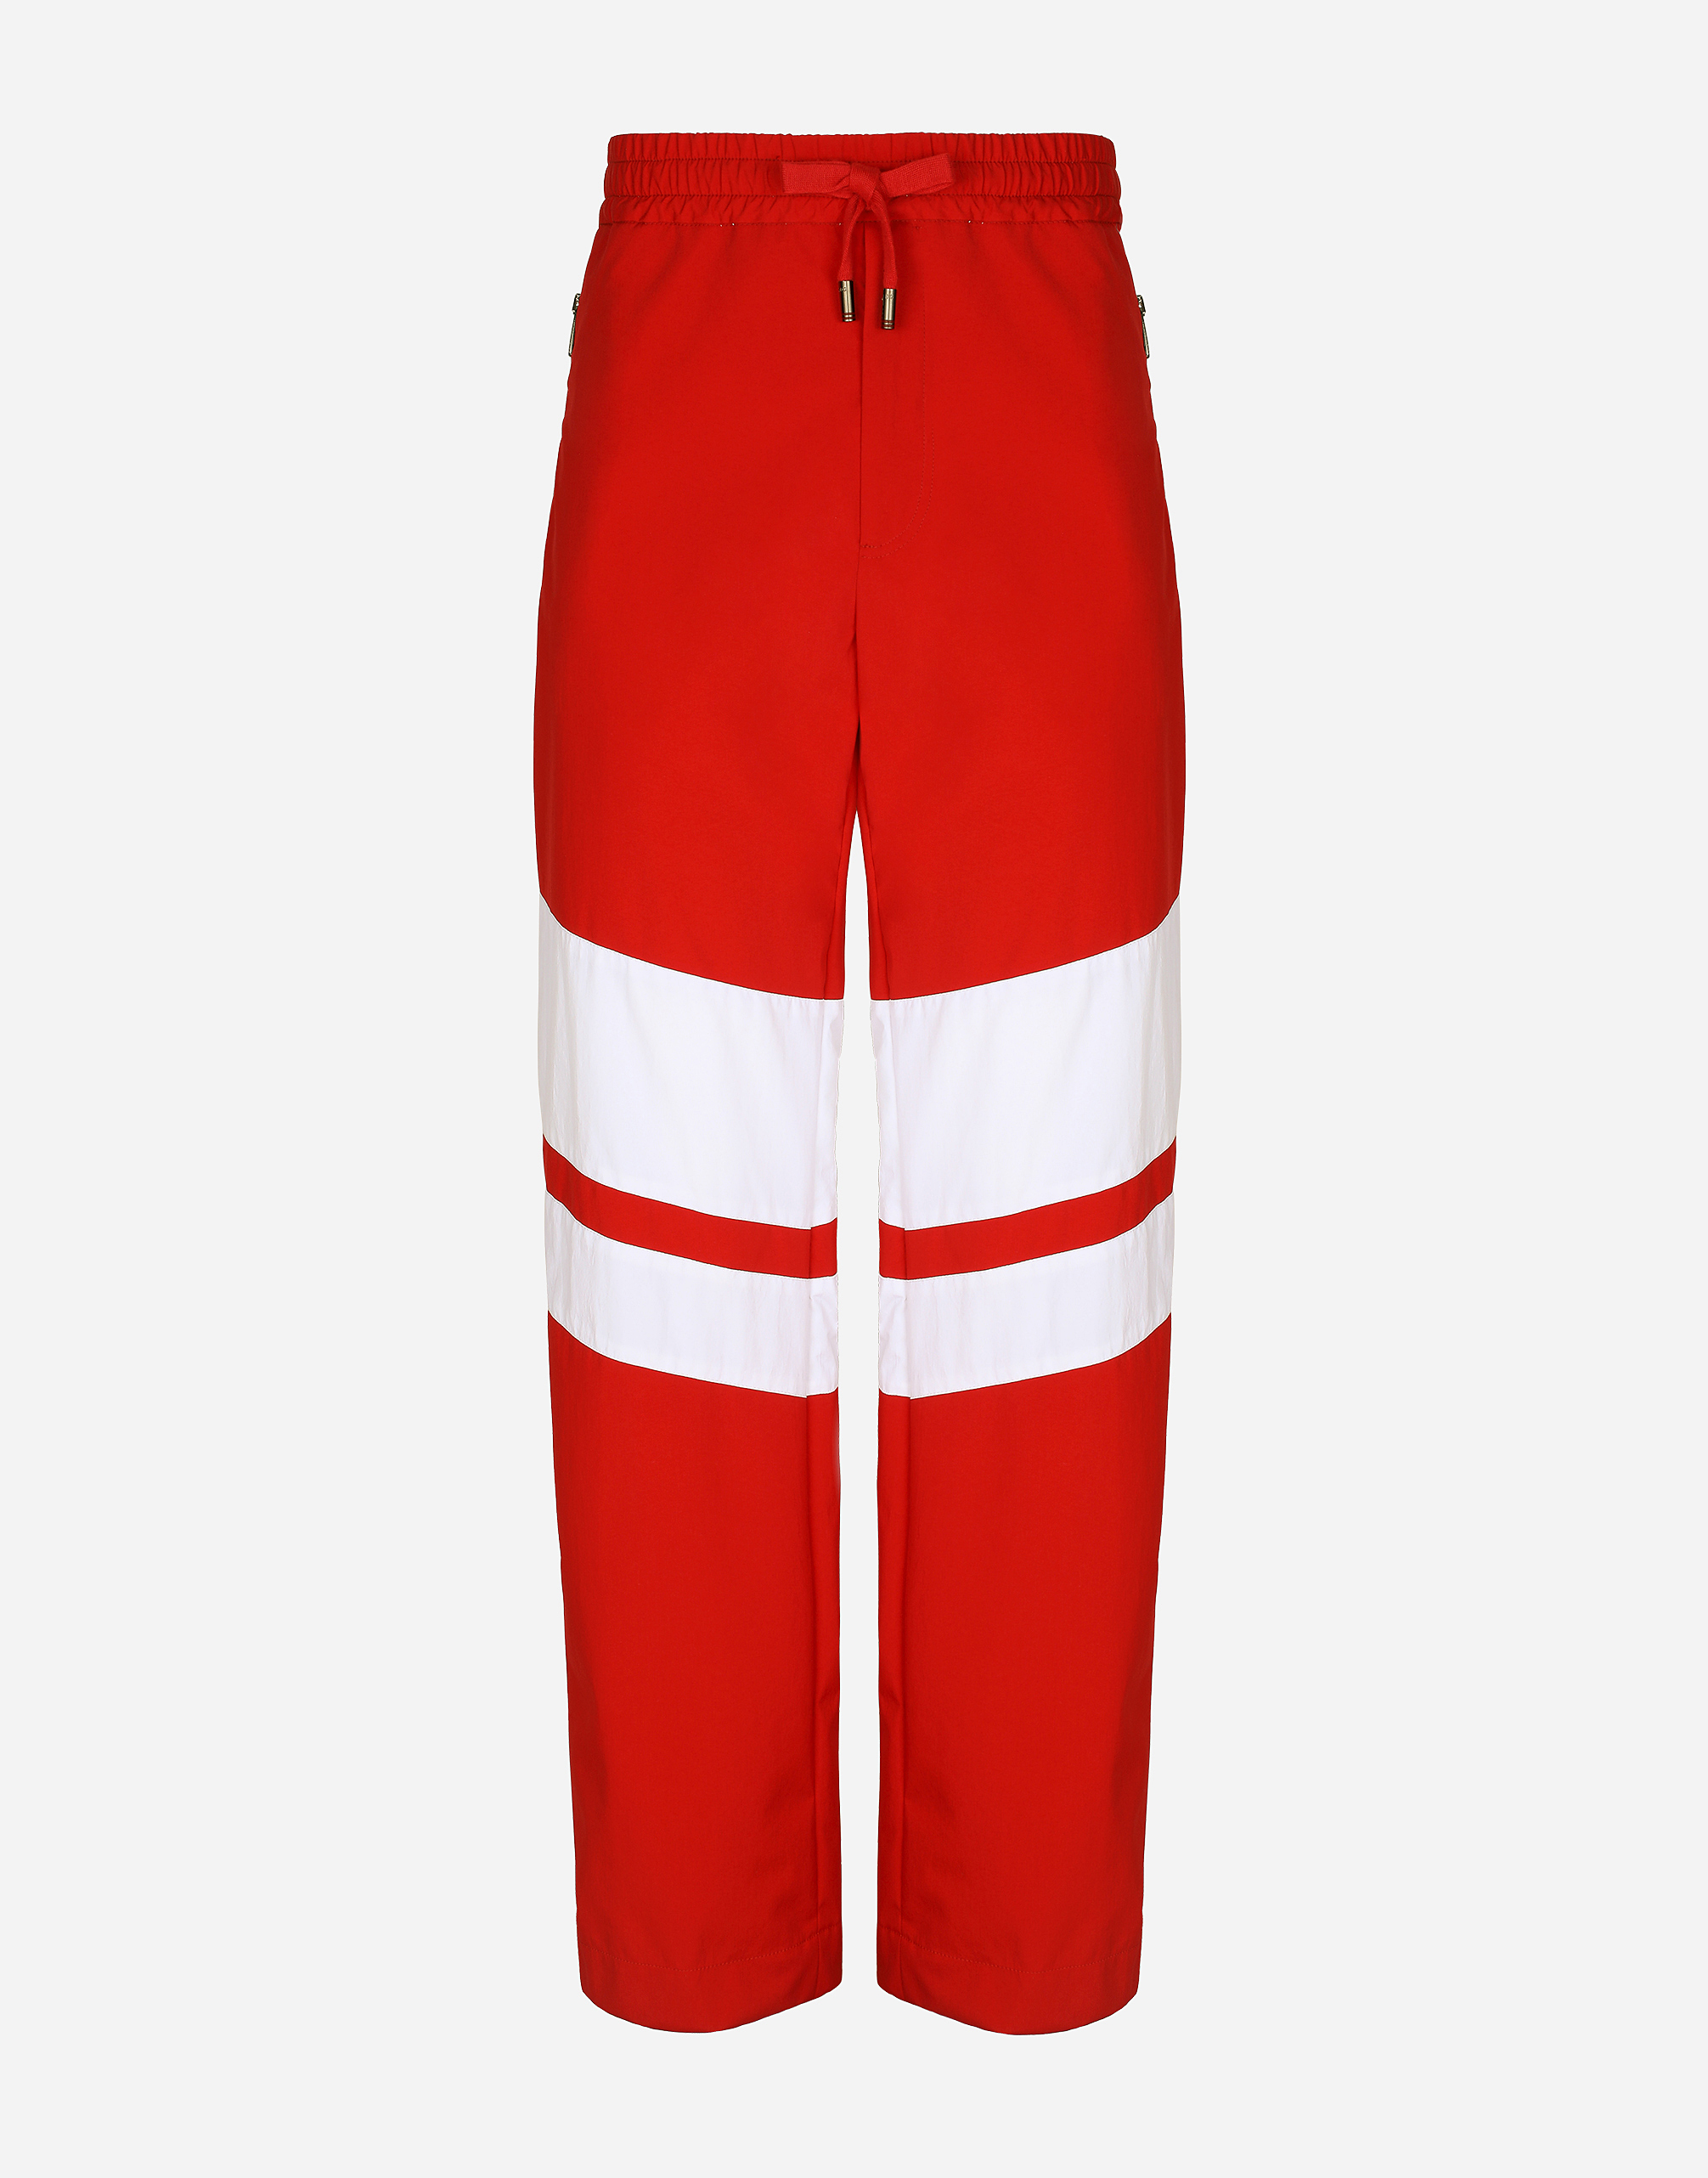 Cordura pants with branded side bands in Red